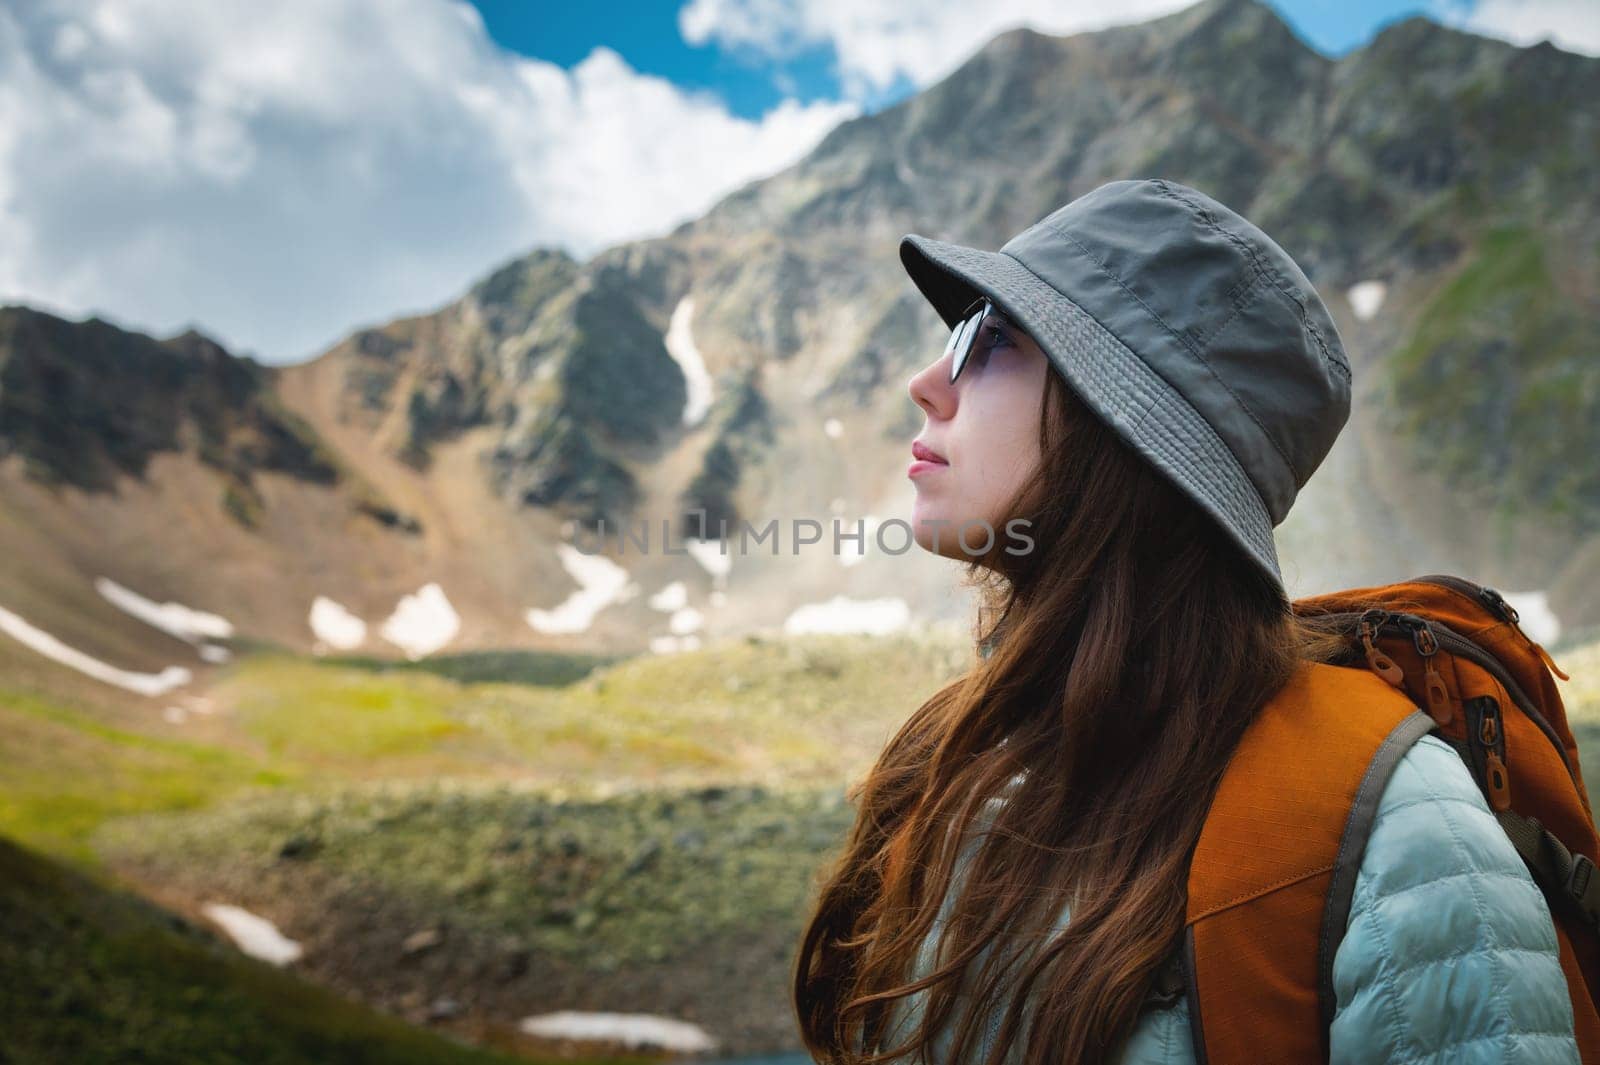 Side view portrait of a woman standing and breathing fresh air in the mountains. Profile of a female explorer breathing fresh air against the backdrop of a snow-covered mountain in the summer on a hike with a backpack.